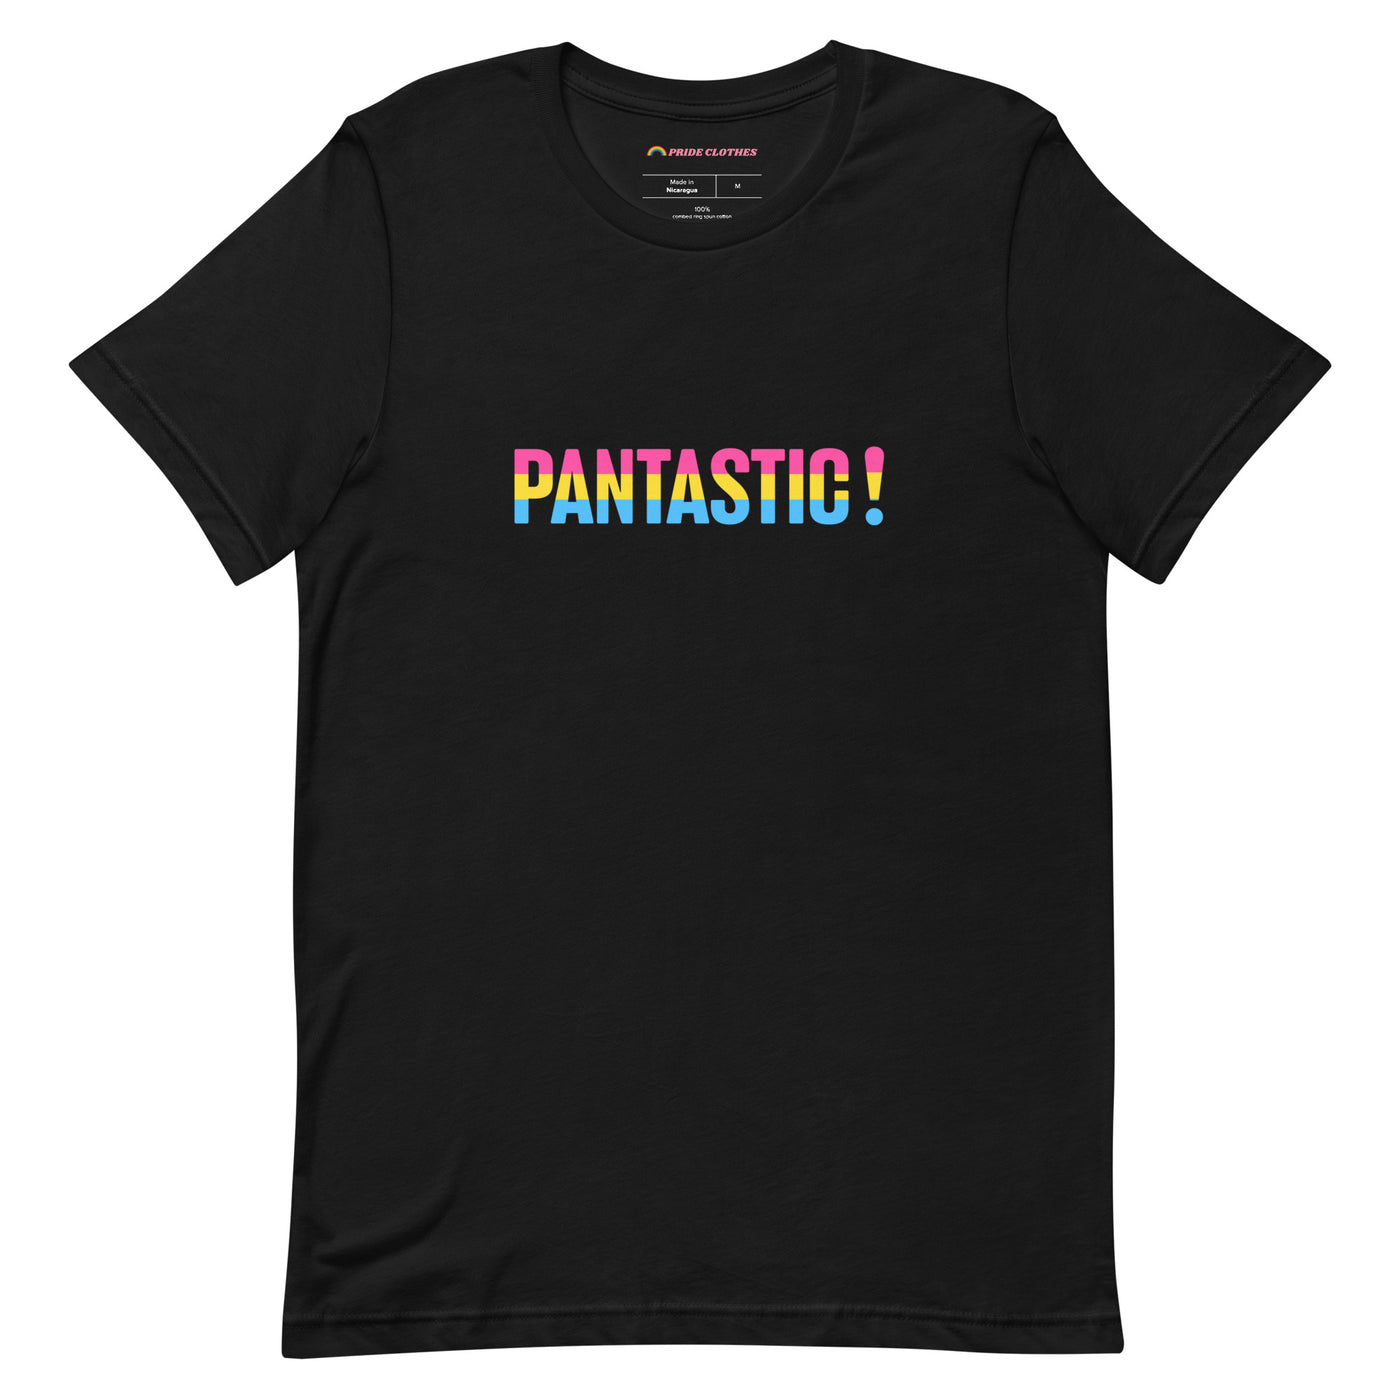 Pride Clothes - Catch and Clever Pansexual Pride Shirt - Black